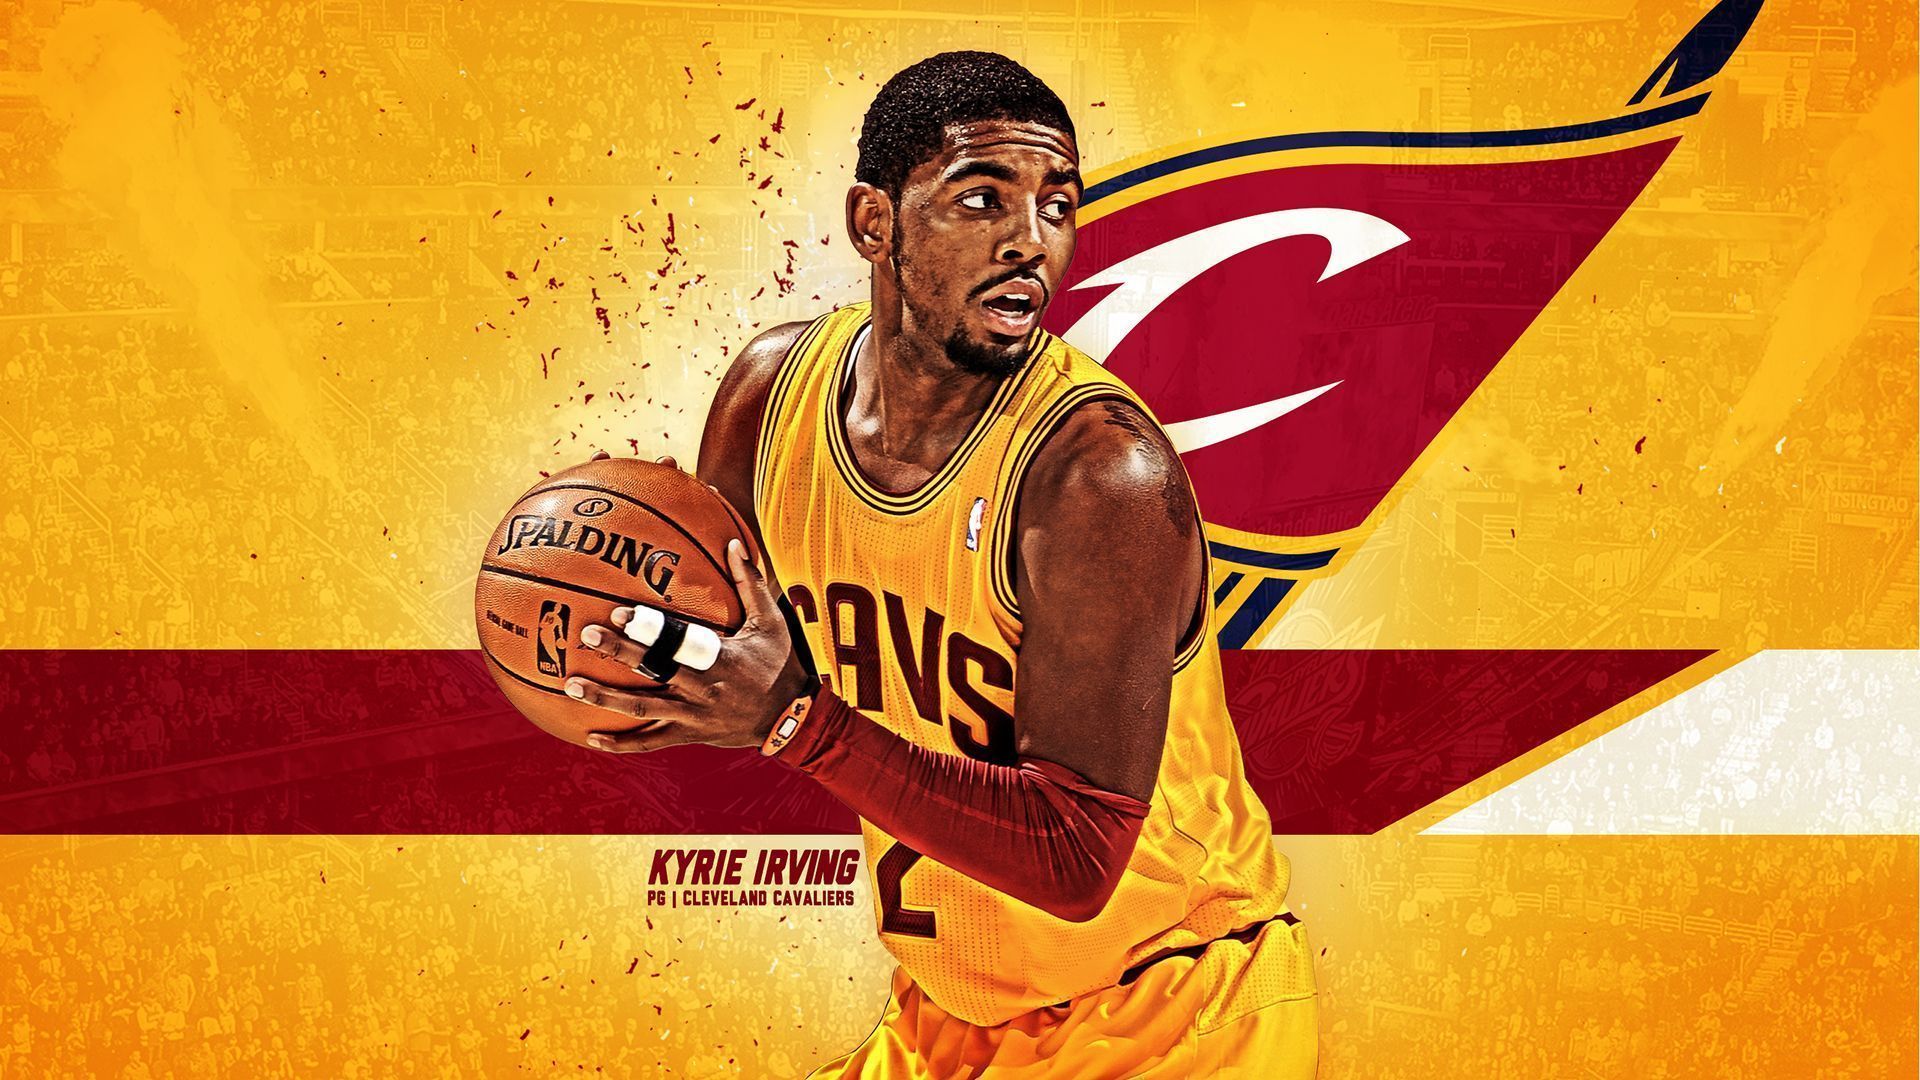 Top Nba Wallpapers 2015 Big 3 Images for Pinterest